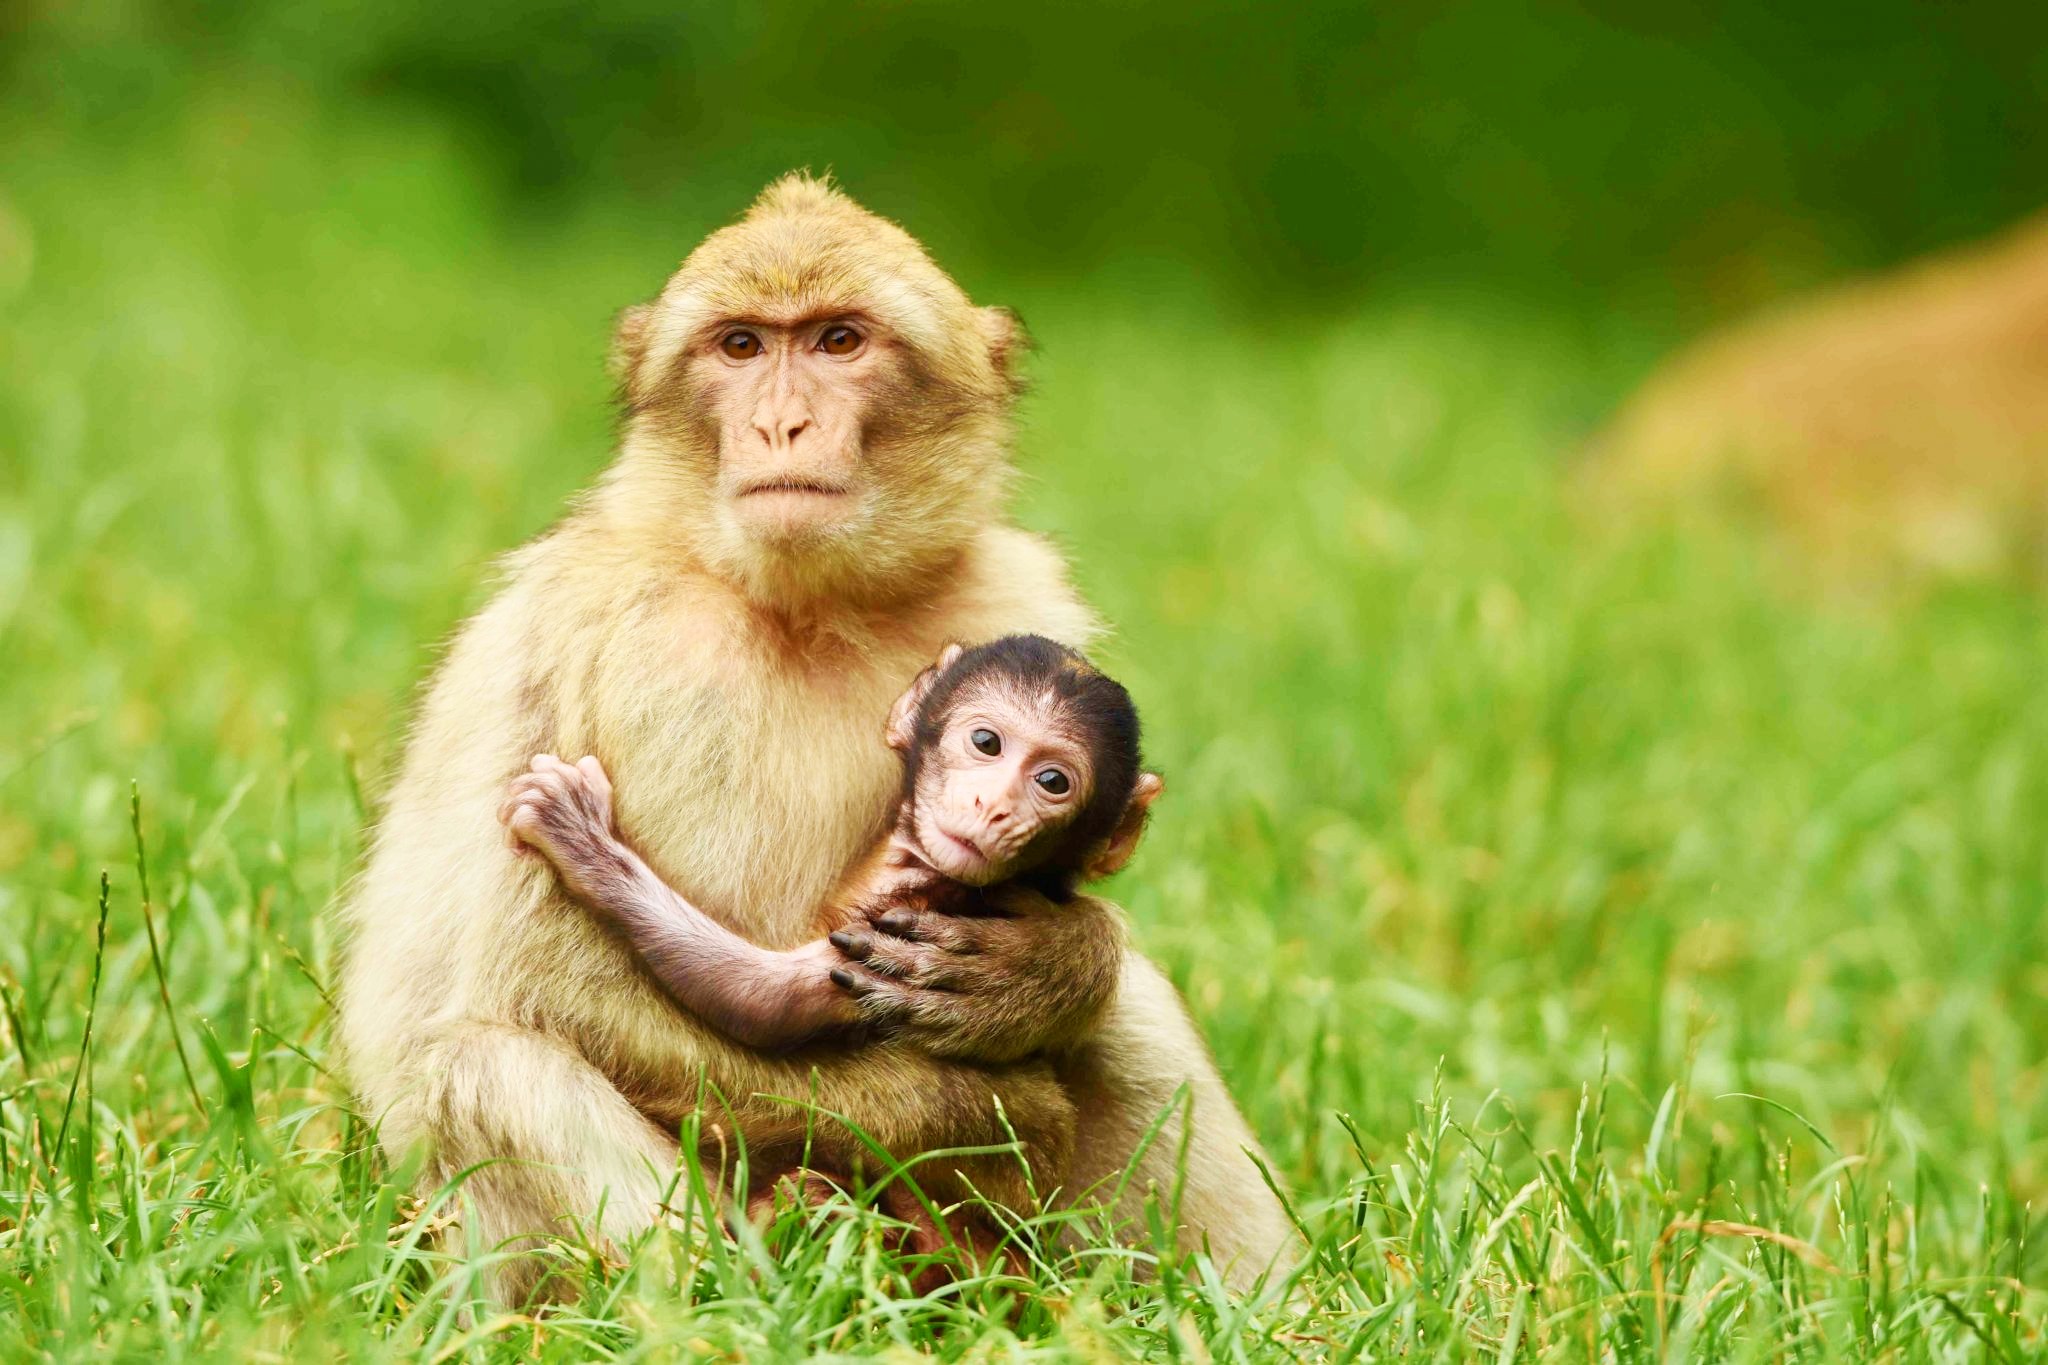 <img src="barbary.jpg" alt="barbary macaques at monkey forest"/> 